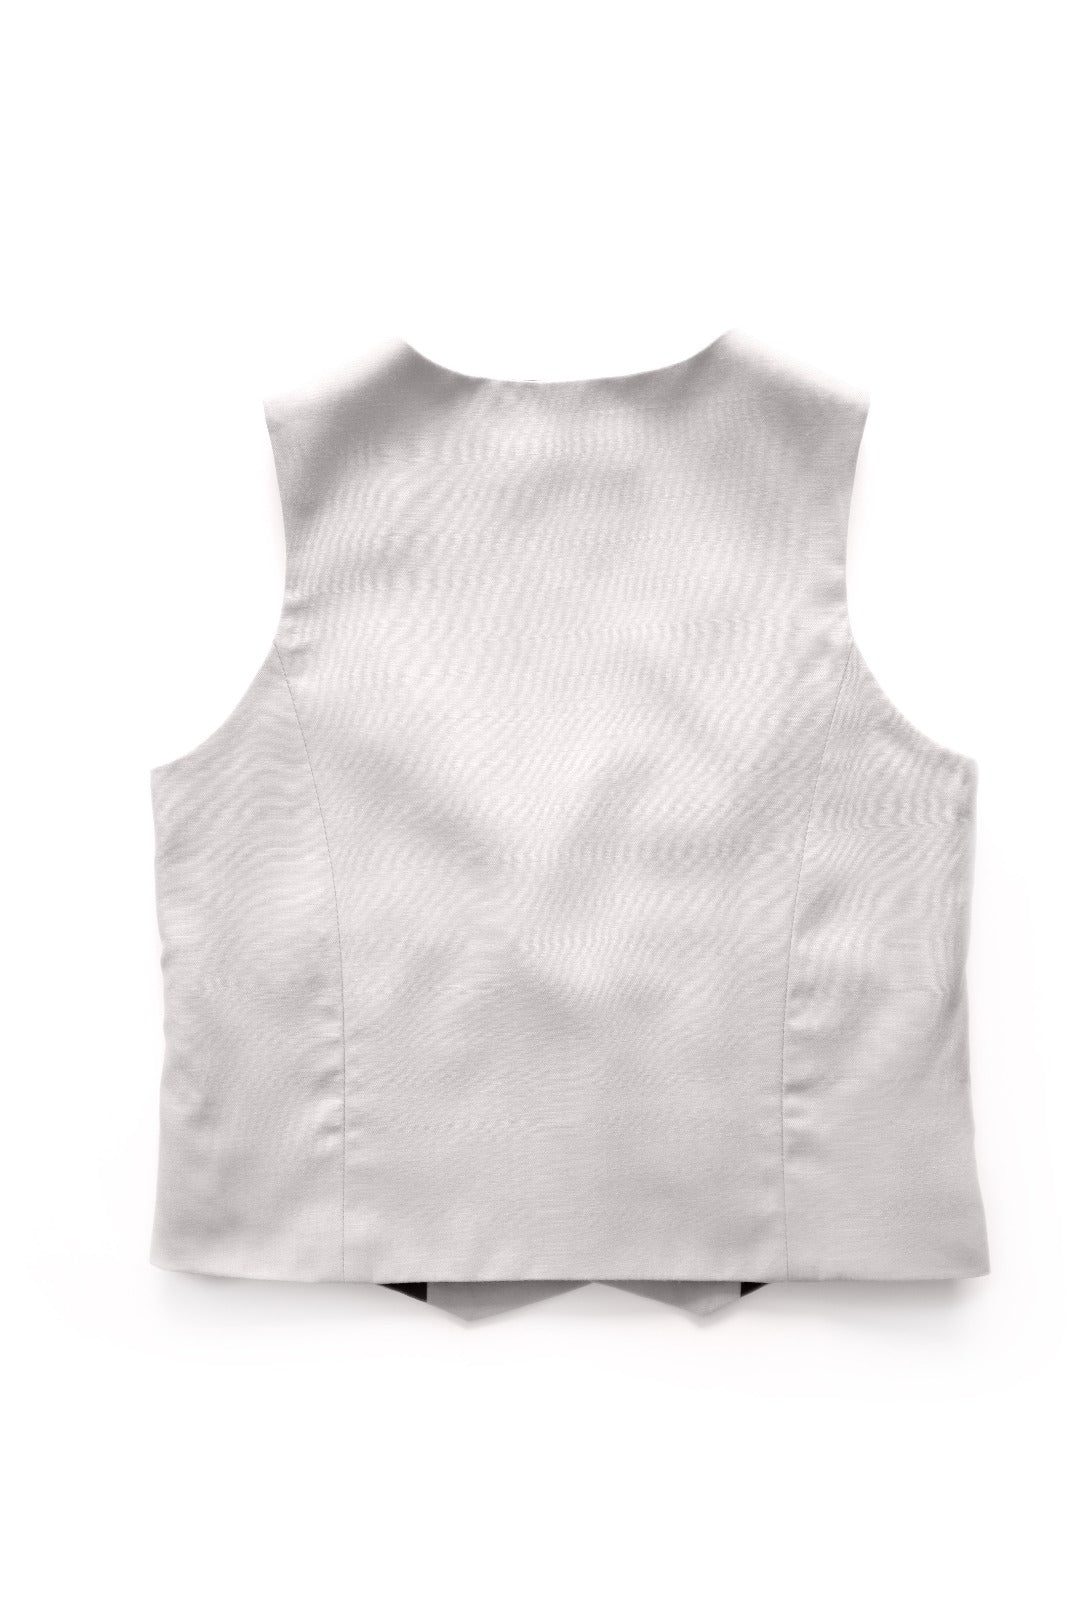 light gray vest with black buttons